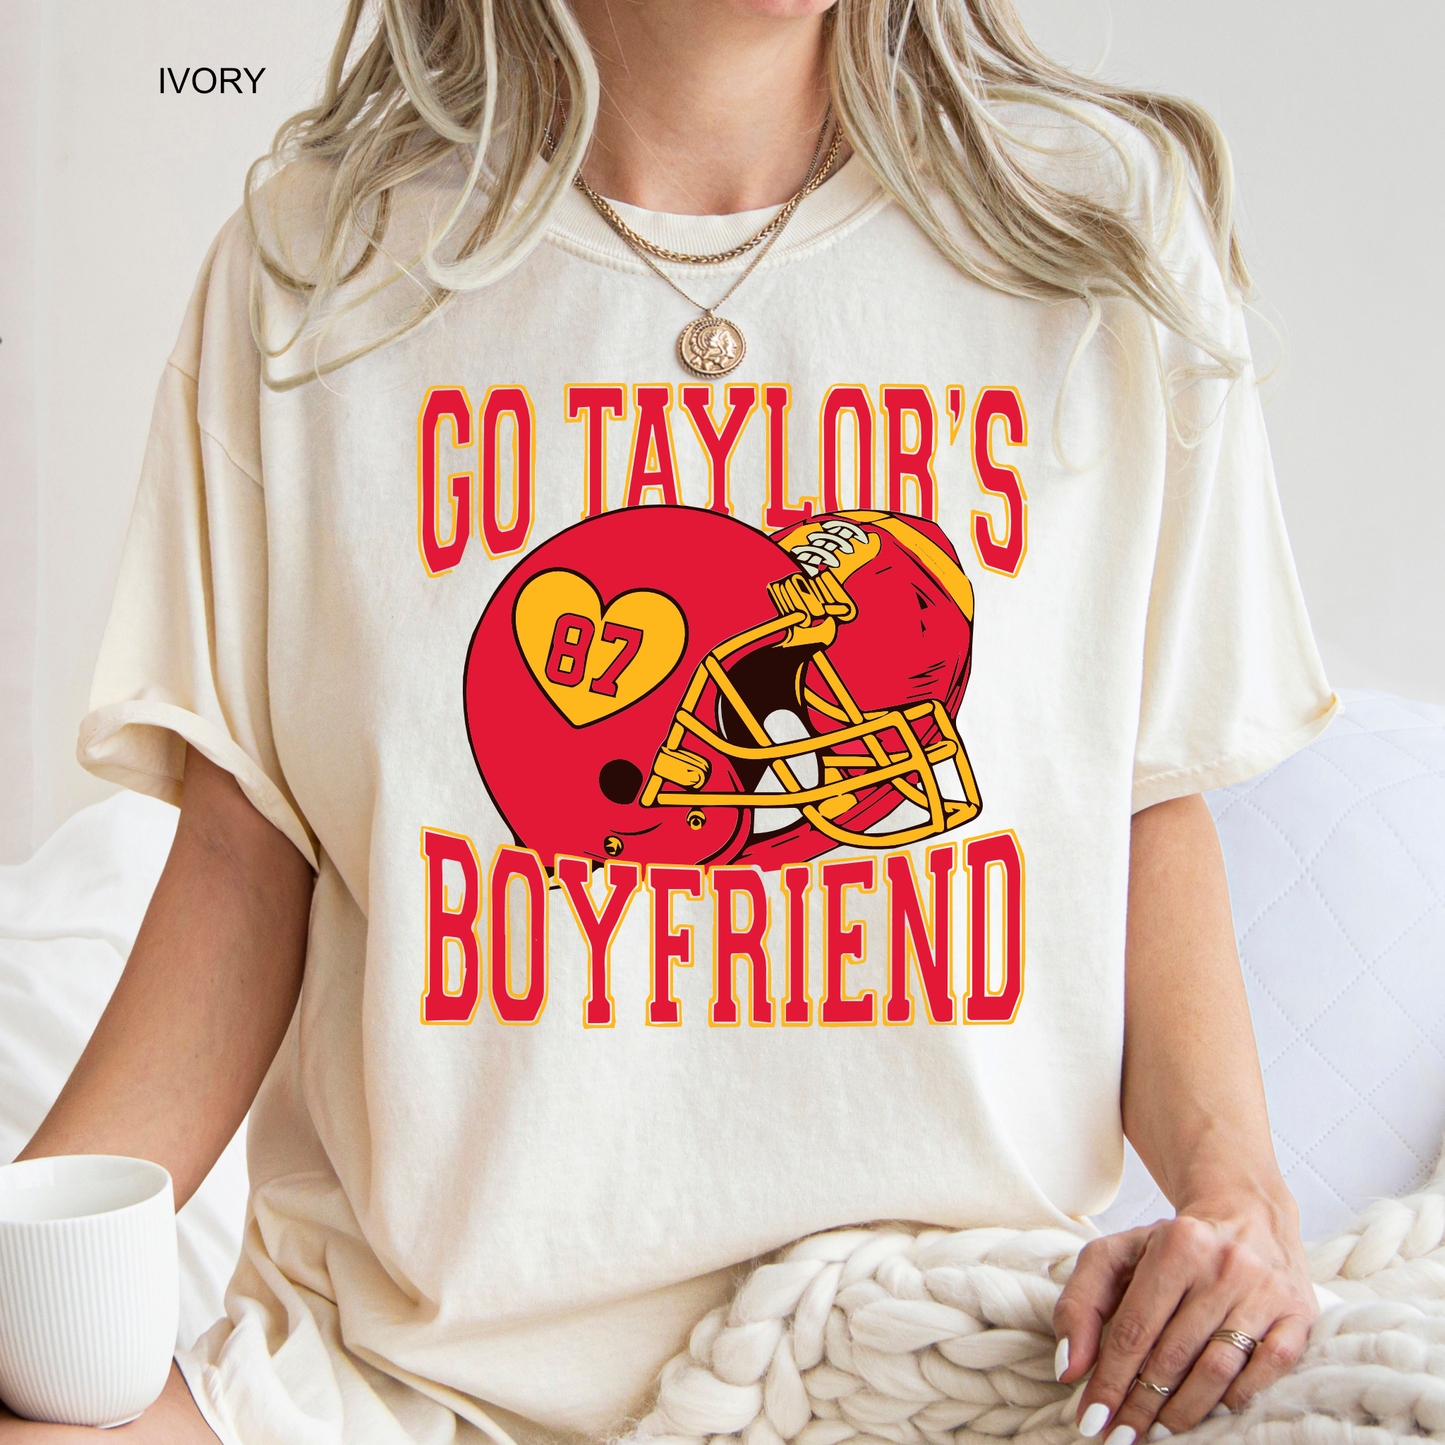 Go Taylor's Boyfriend | Comfort Color Short Sleeve Graphic Tees | Adults